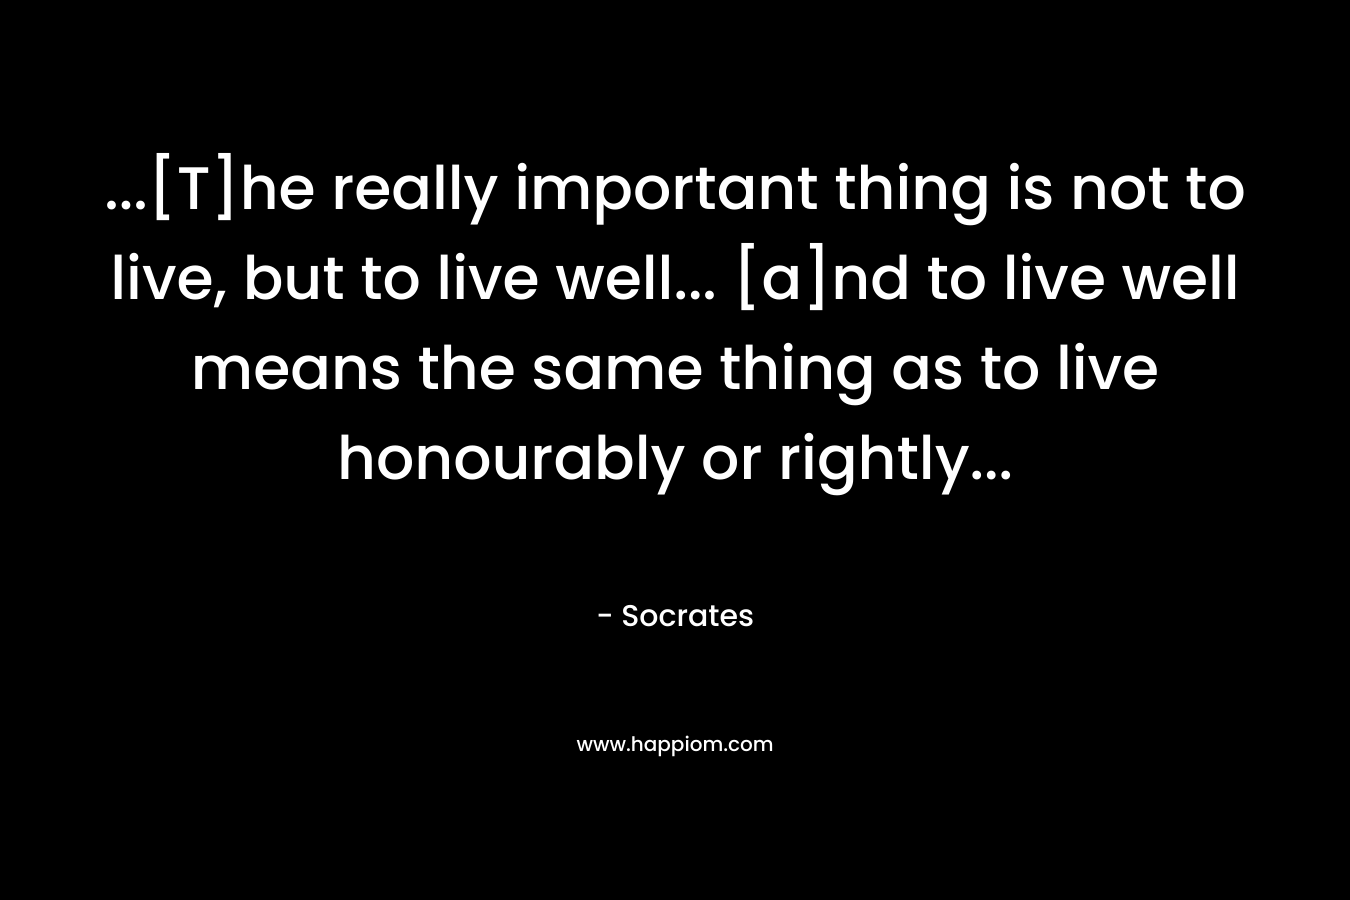 ...[T]he really important thing is not to live, but to live well... [a]nd to live well means the same thing as to live honourably or rightly...